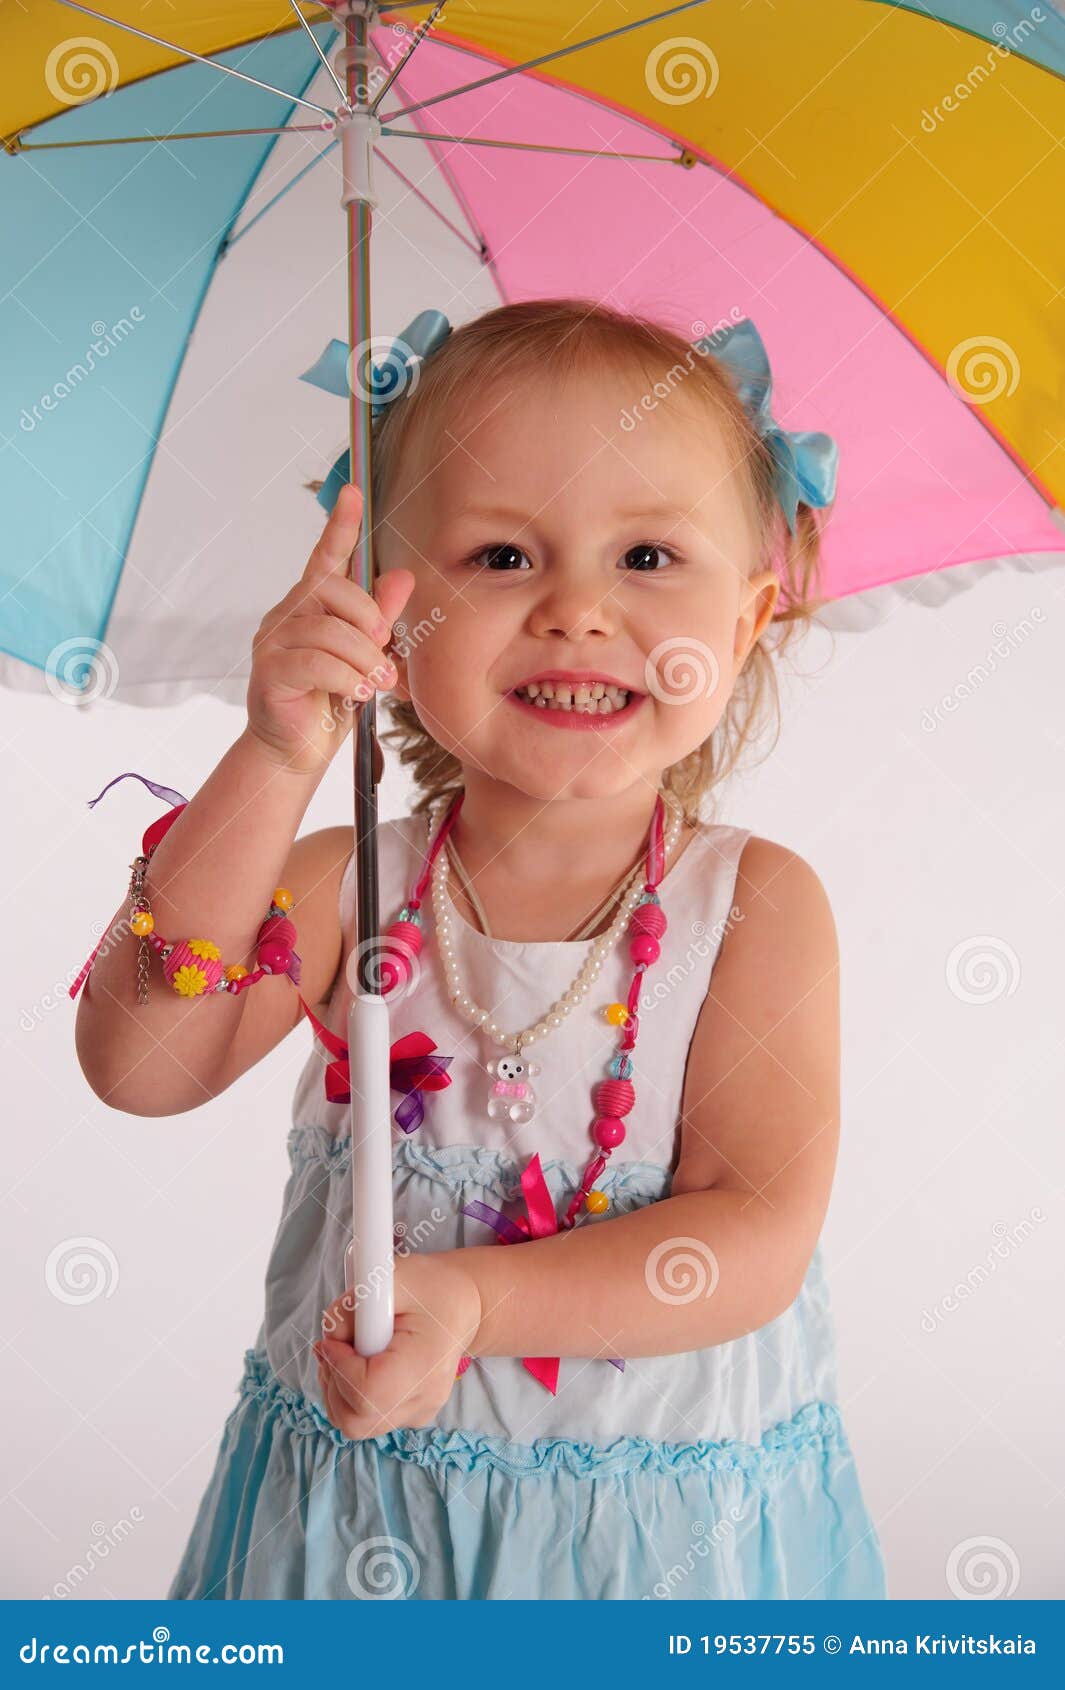 Little girl with umbrella stock image. Image of expressive - 19537755